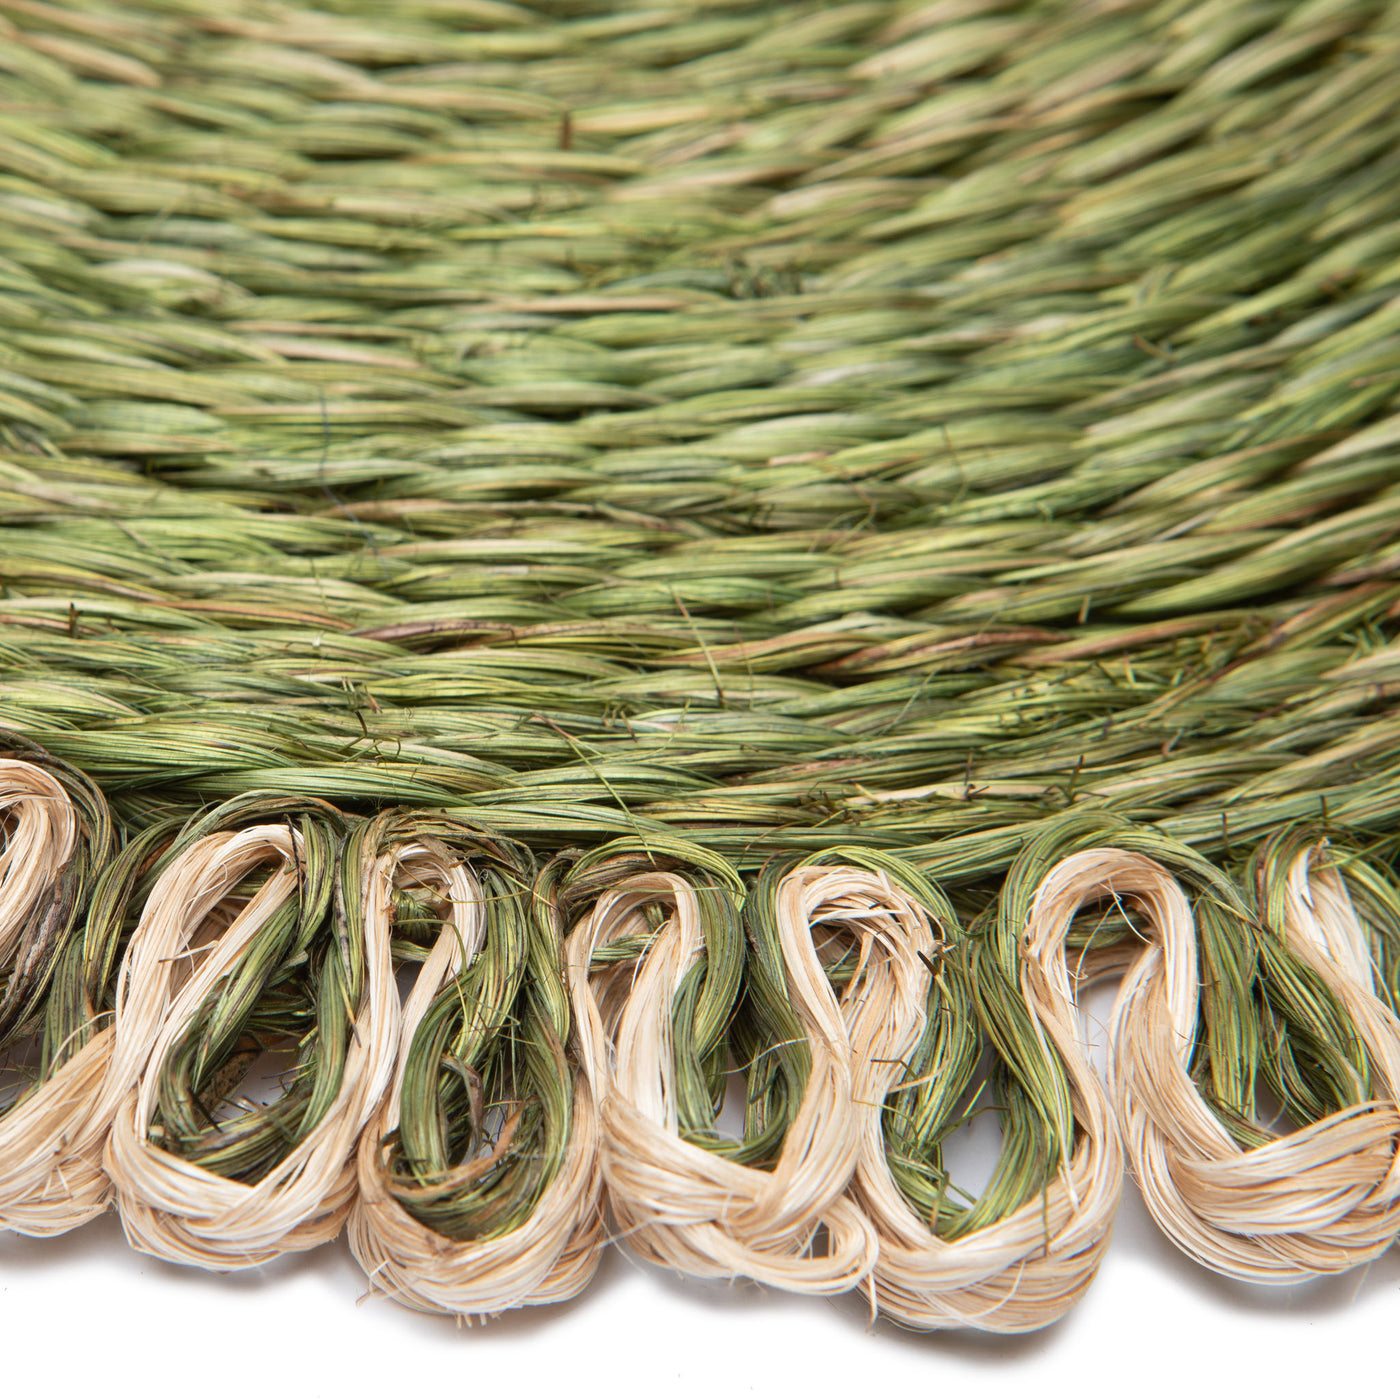 Loopy Abaca Olive Green & Natural 15" Round - Set of 4